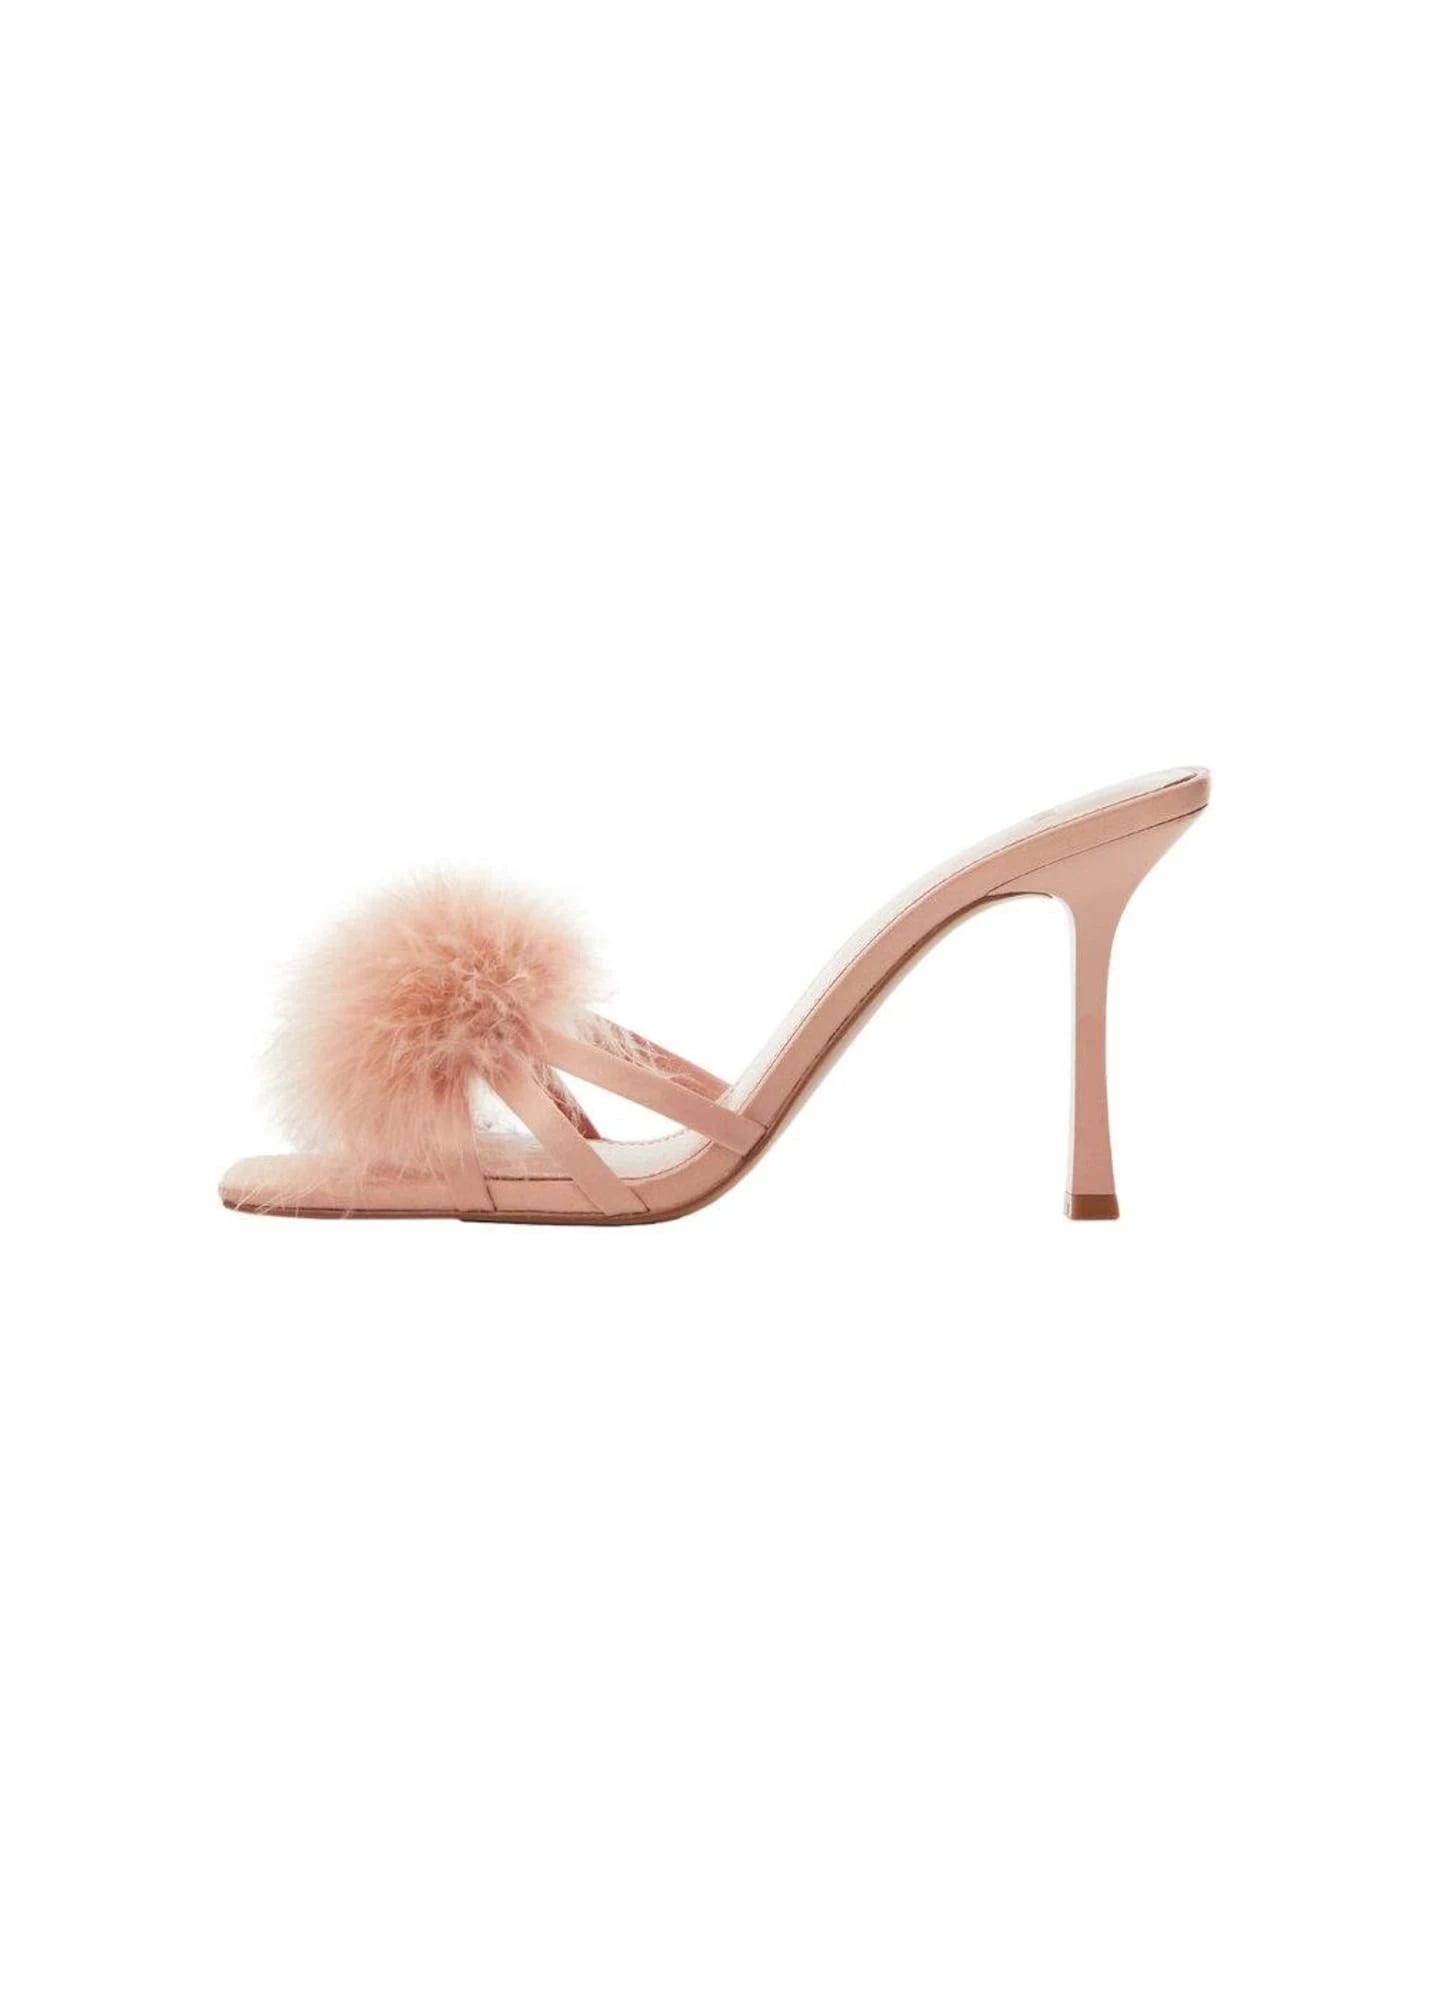 Stylish Heels with Feather Decoration - Light Pink for Women | Image